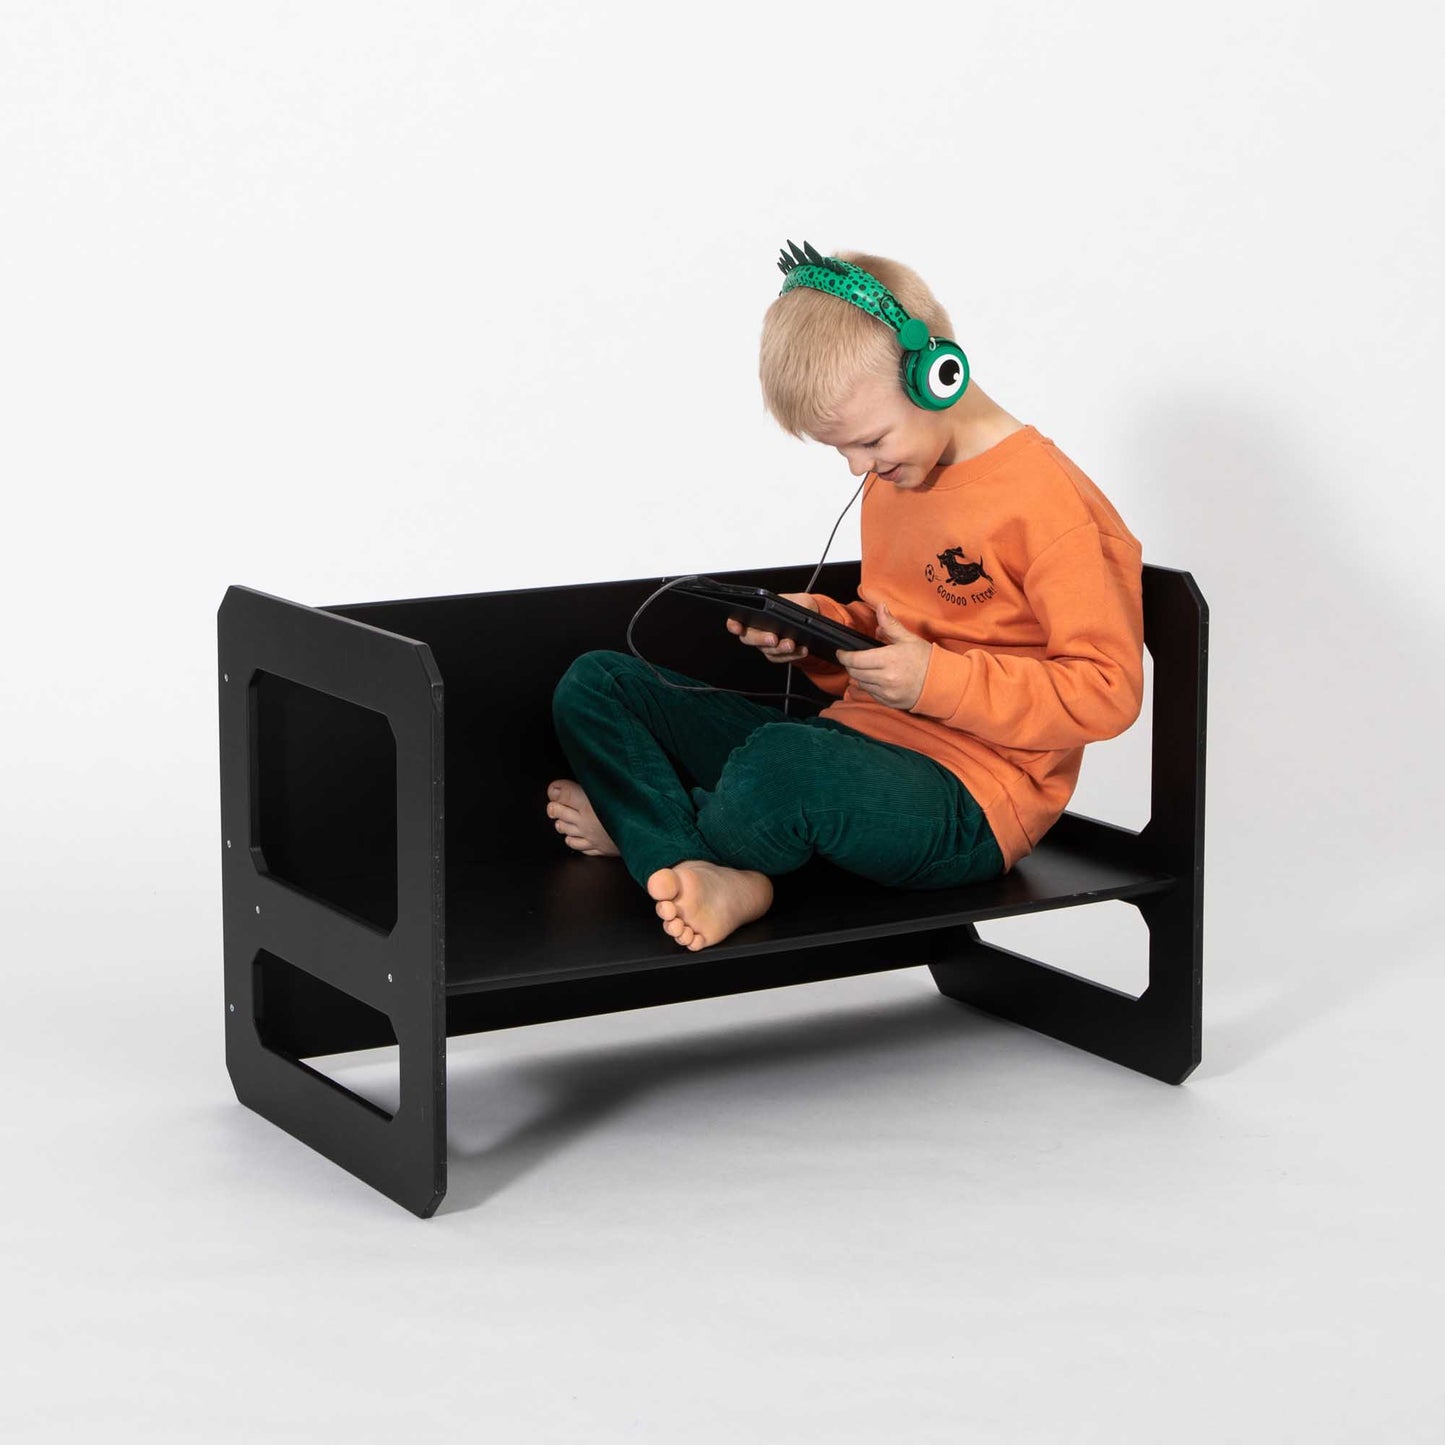 A young boy sitting on a black bench with headphones, enjoying the comfort of the Sweet Home From Wood Montessori weaning table.